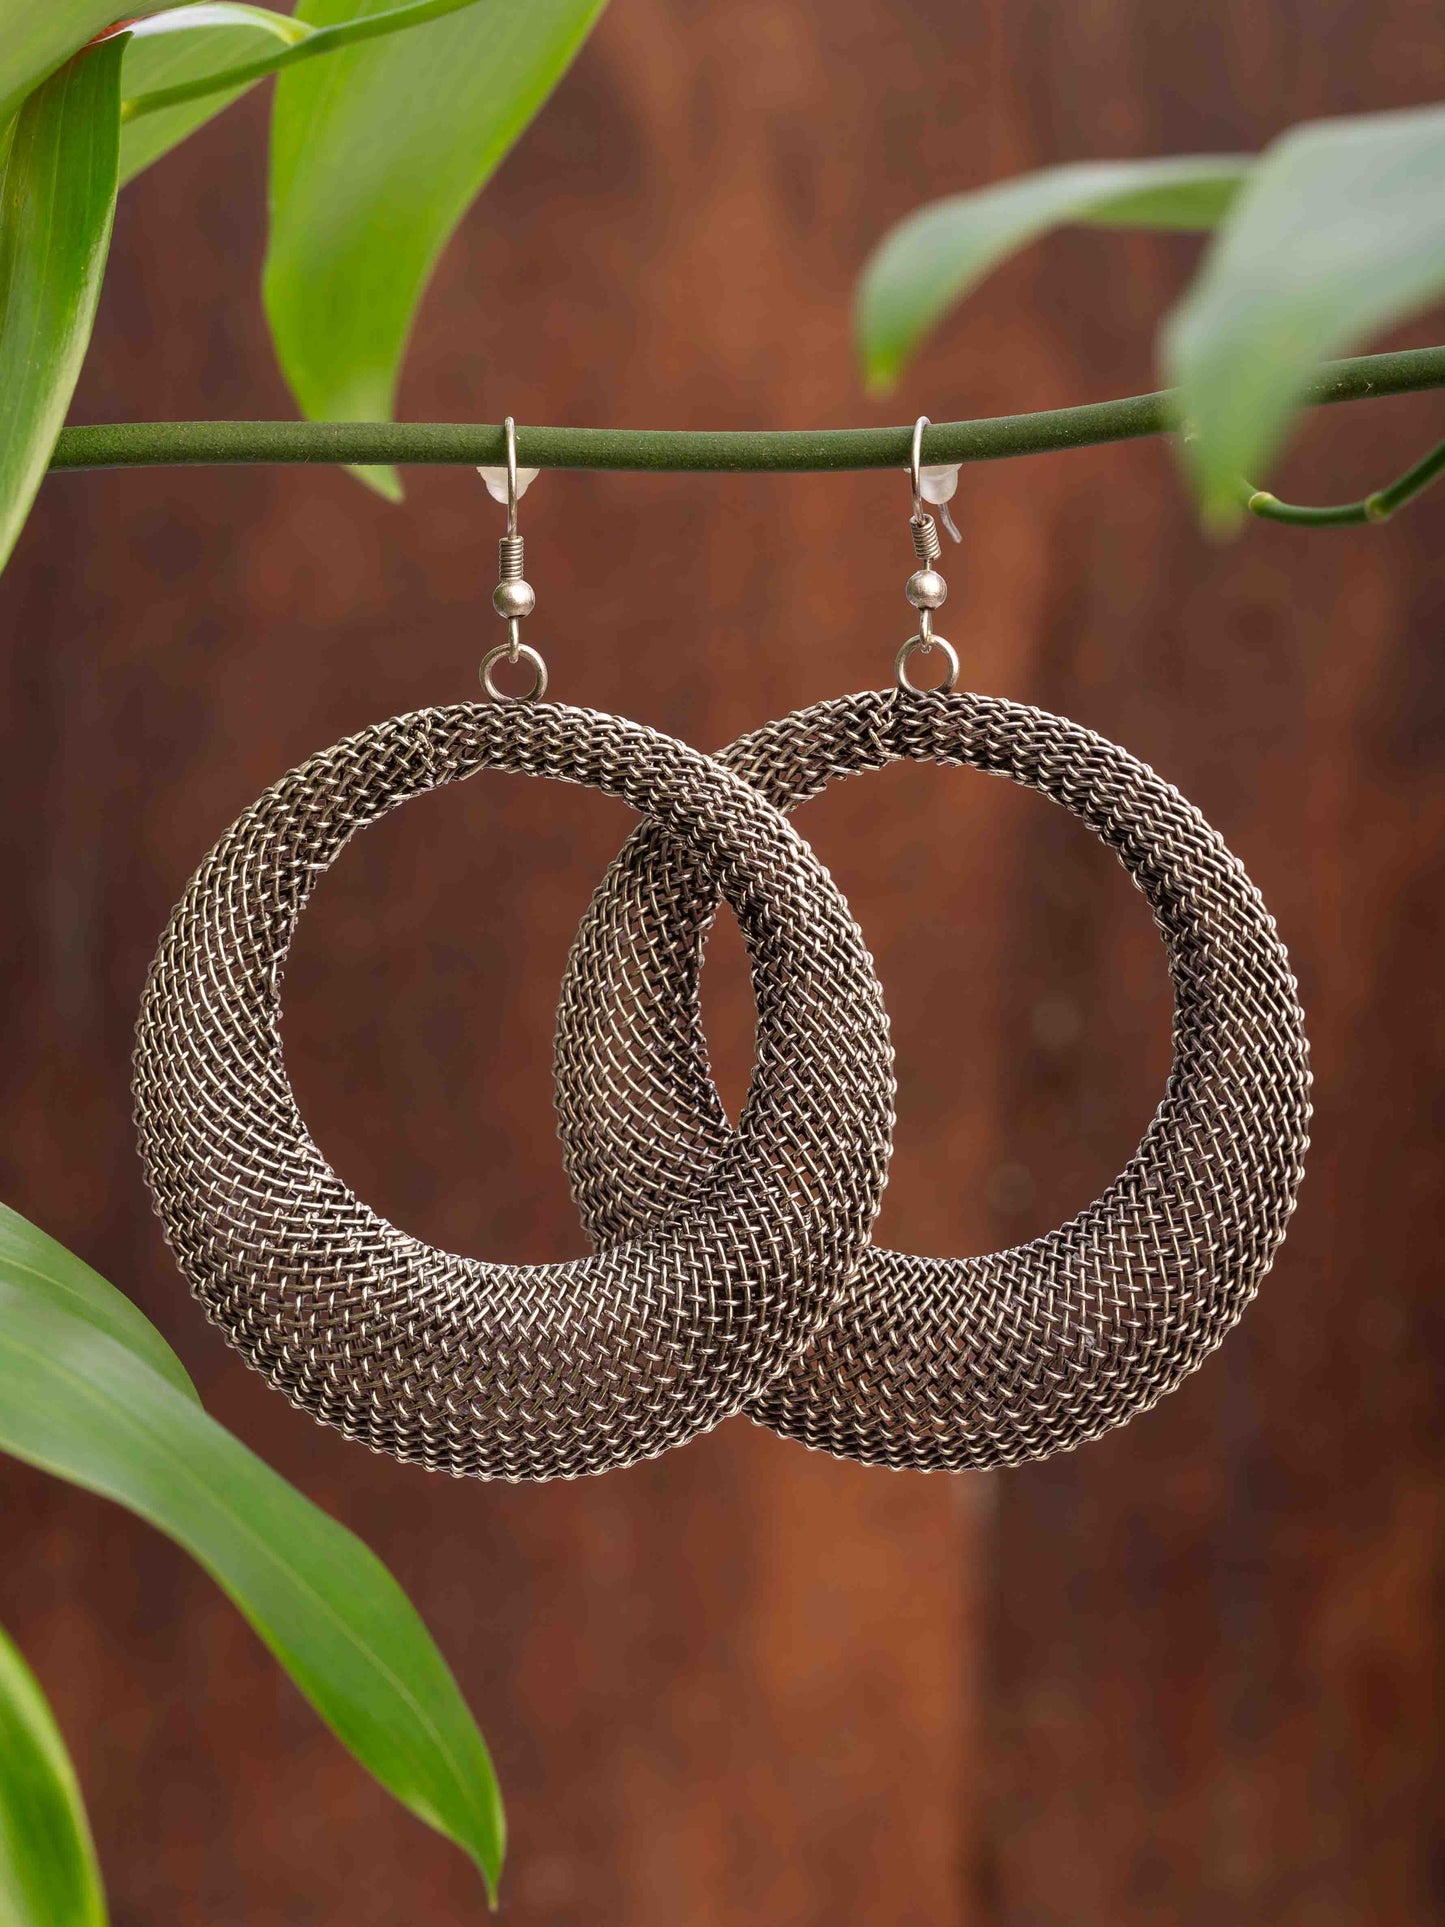 Wired Hoop Earring - a large wire meshed earring